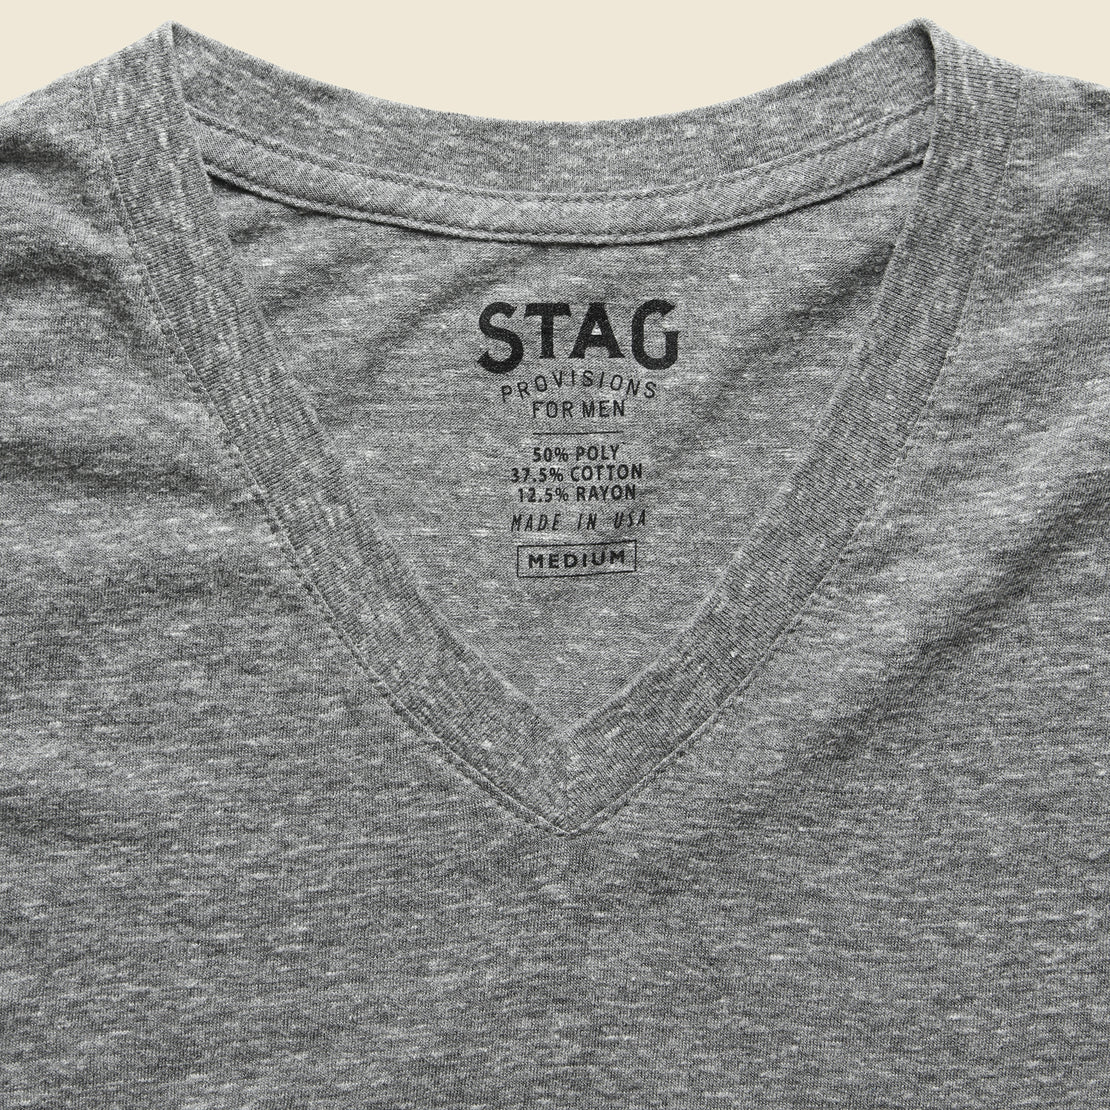 V-Neck Tee - Grey - STAG - STAG Provisions - Tops - S/S Tee